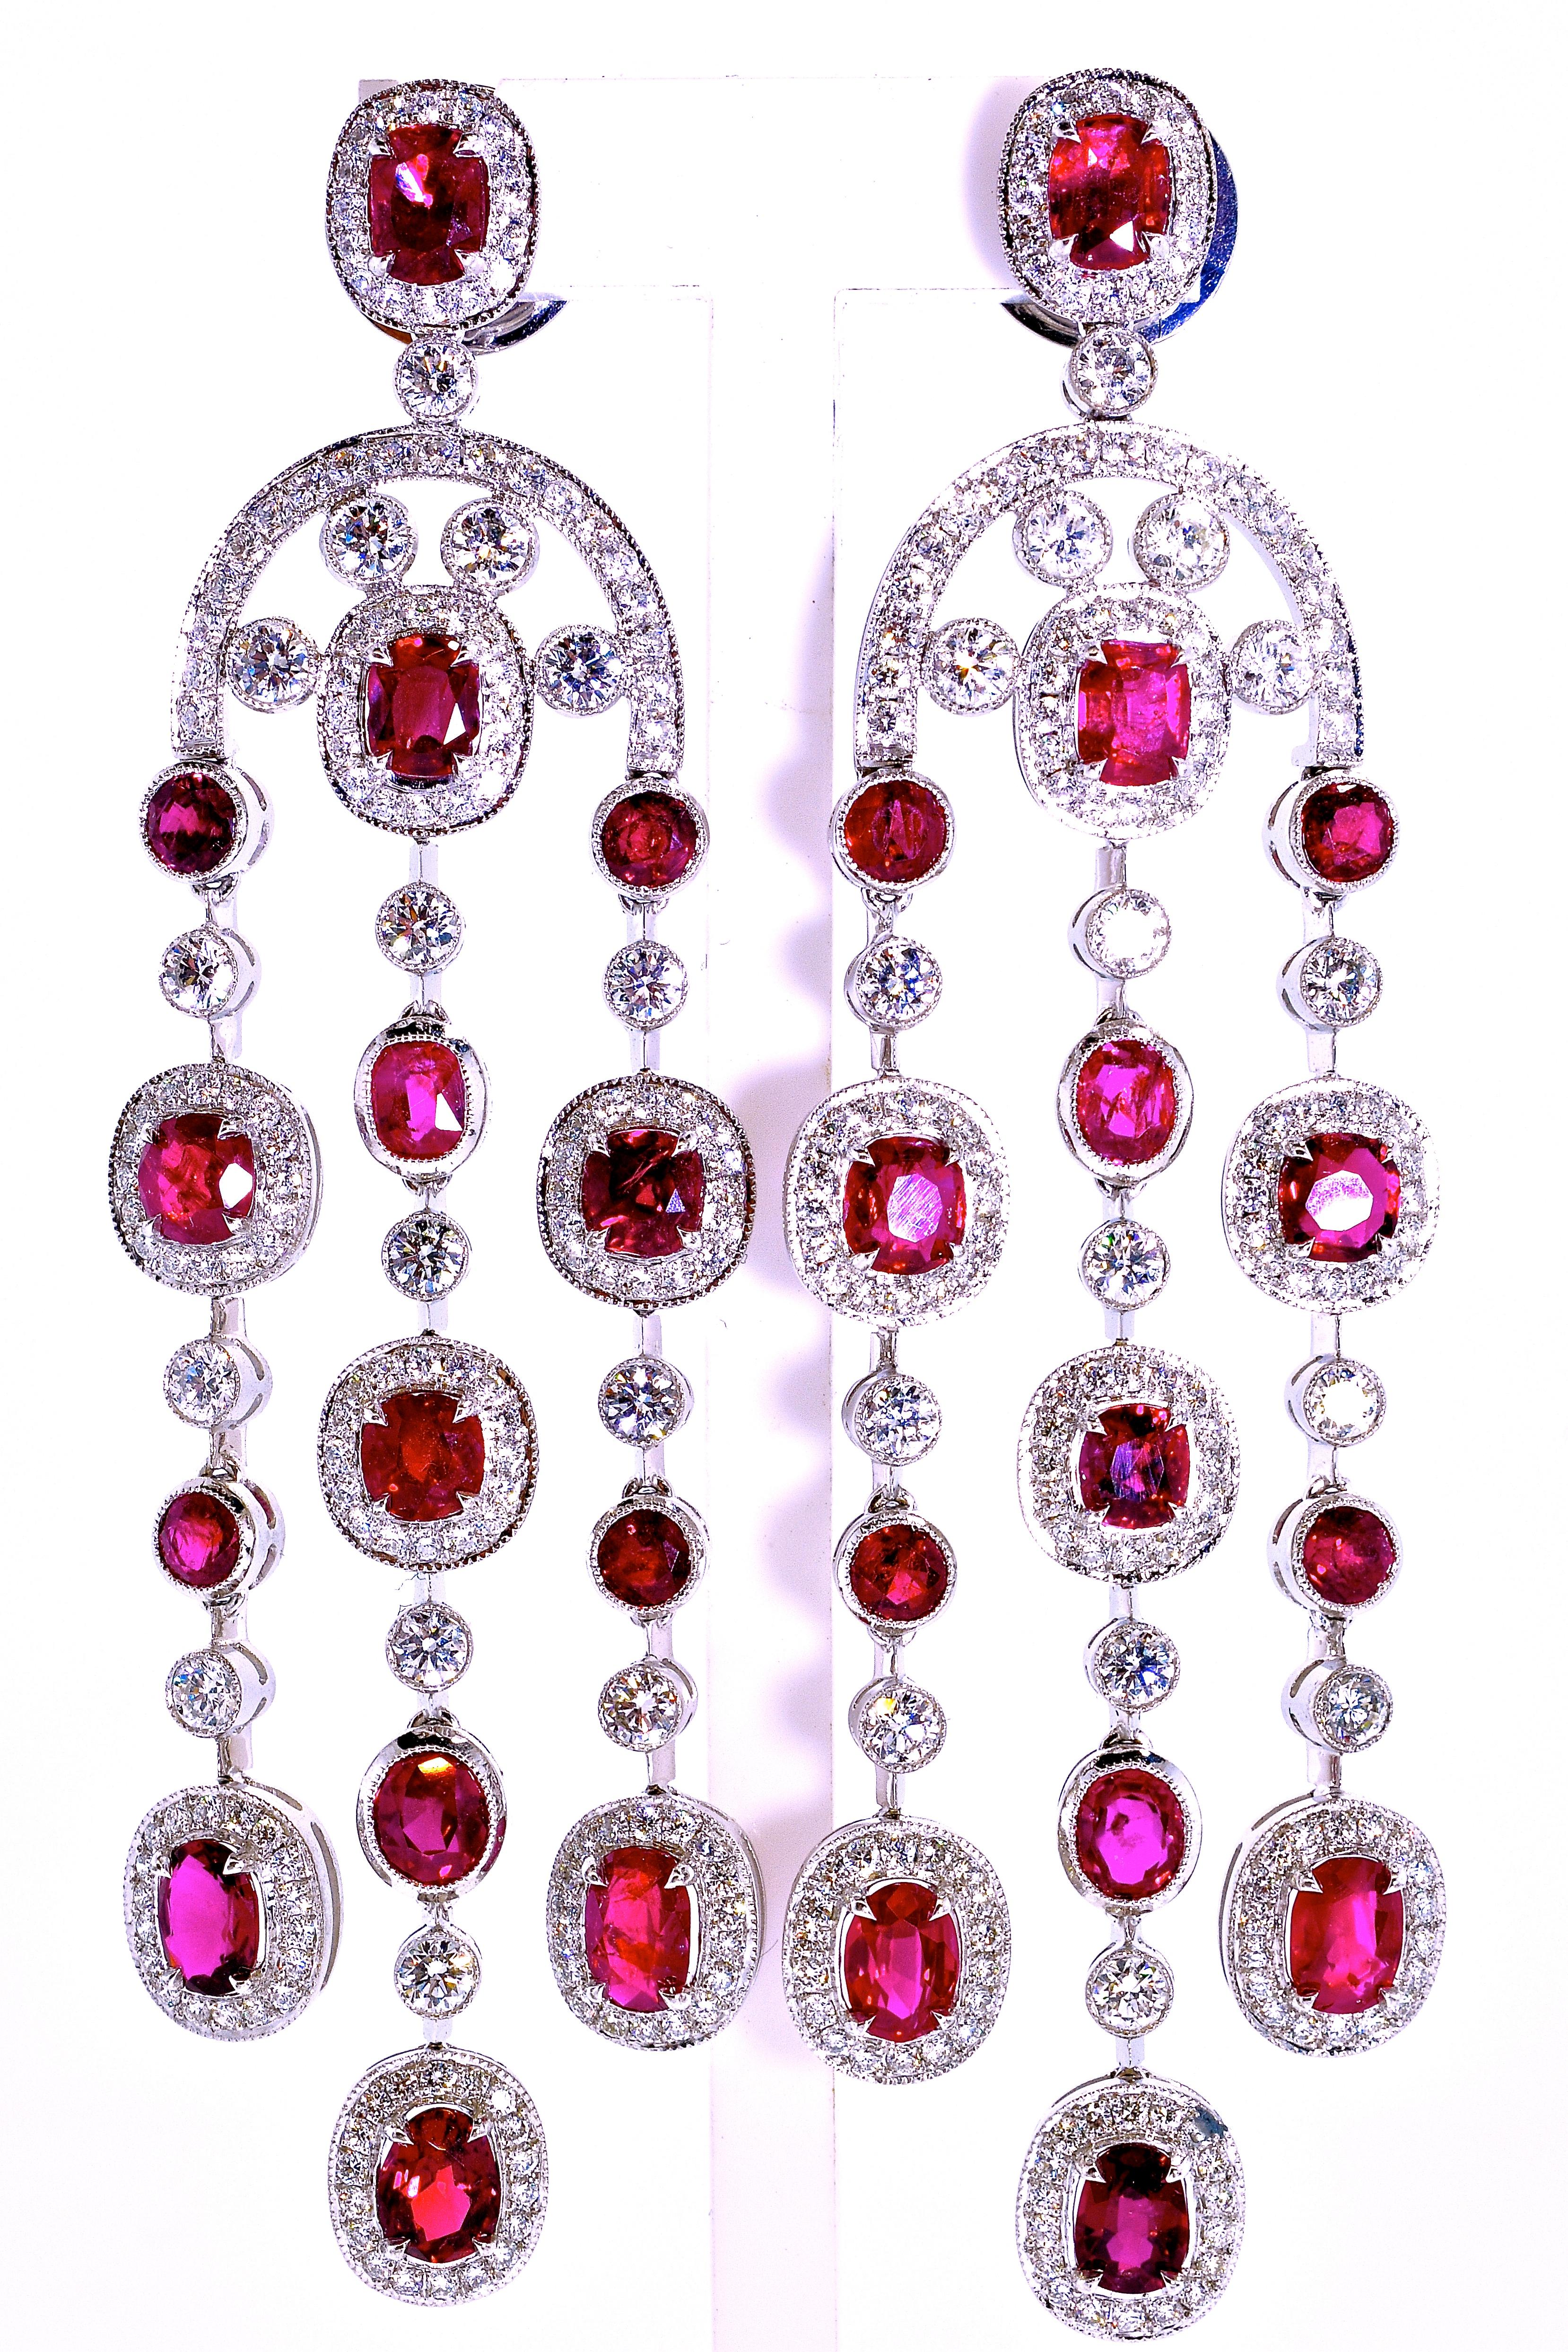 Platinum chandelier earrings possessing GIA certificates which state that the rubies are unheated and untreated. There are 10.29 cts of fine vivid red rubies in 28 round well cut stones.  In addition these earrings possess 330 well cut and well